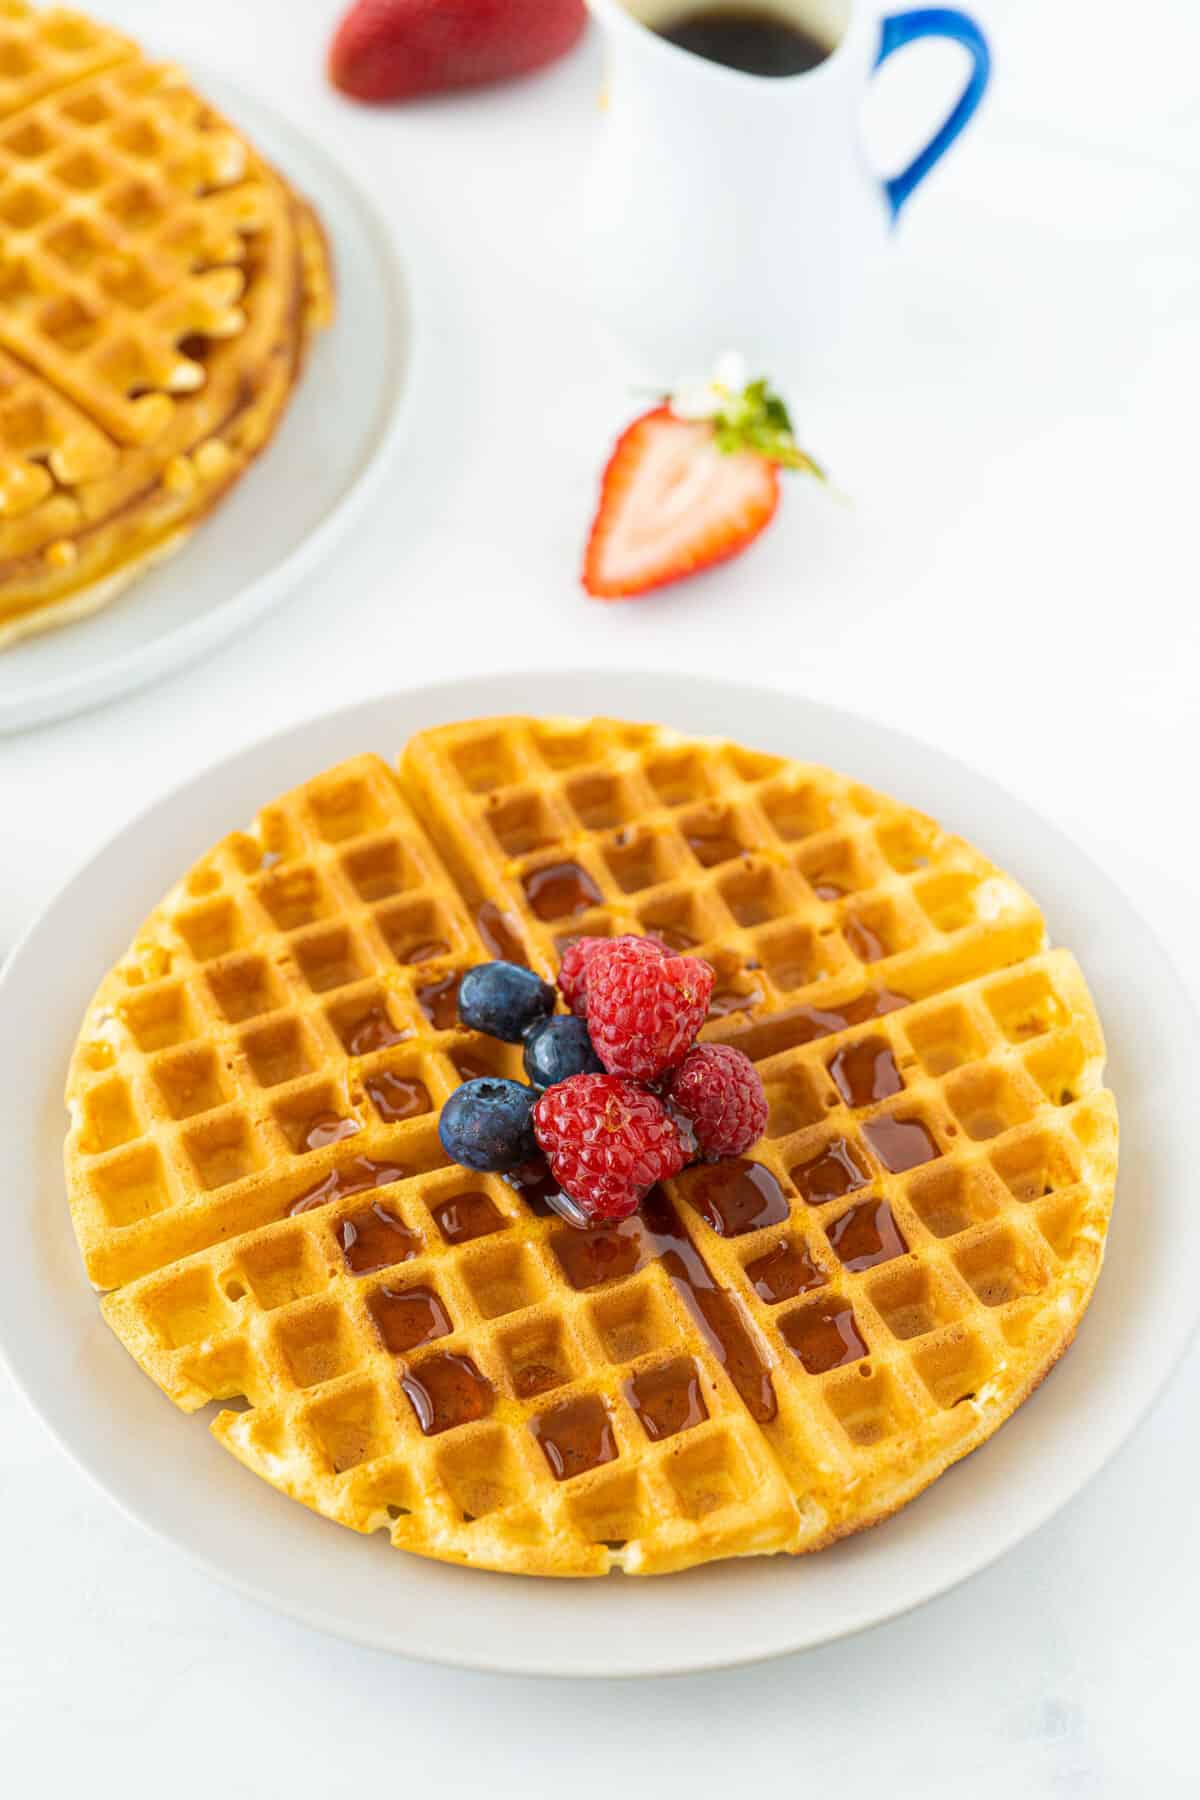 bisquick waffles on a white plate with syrup and berries